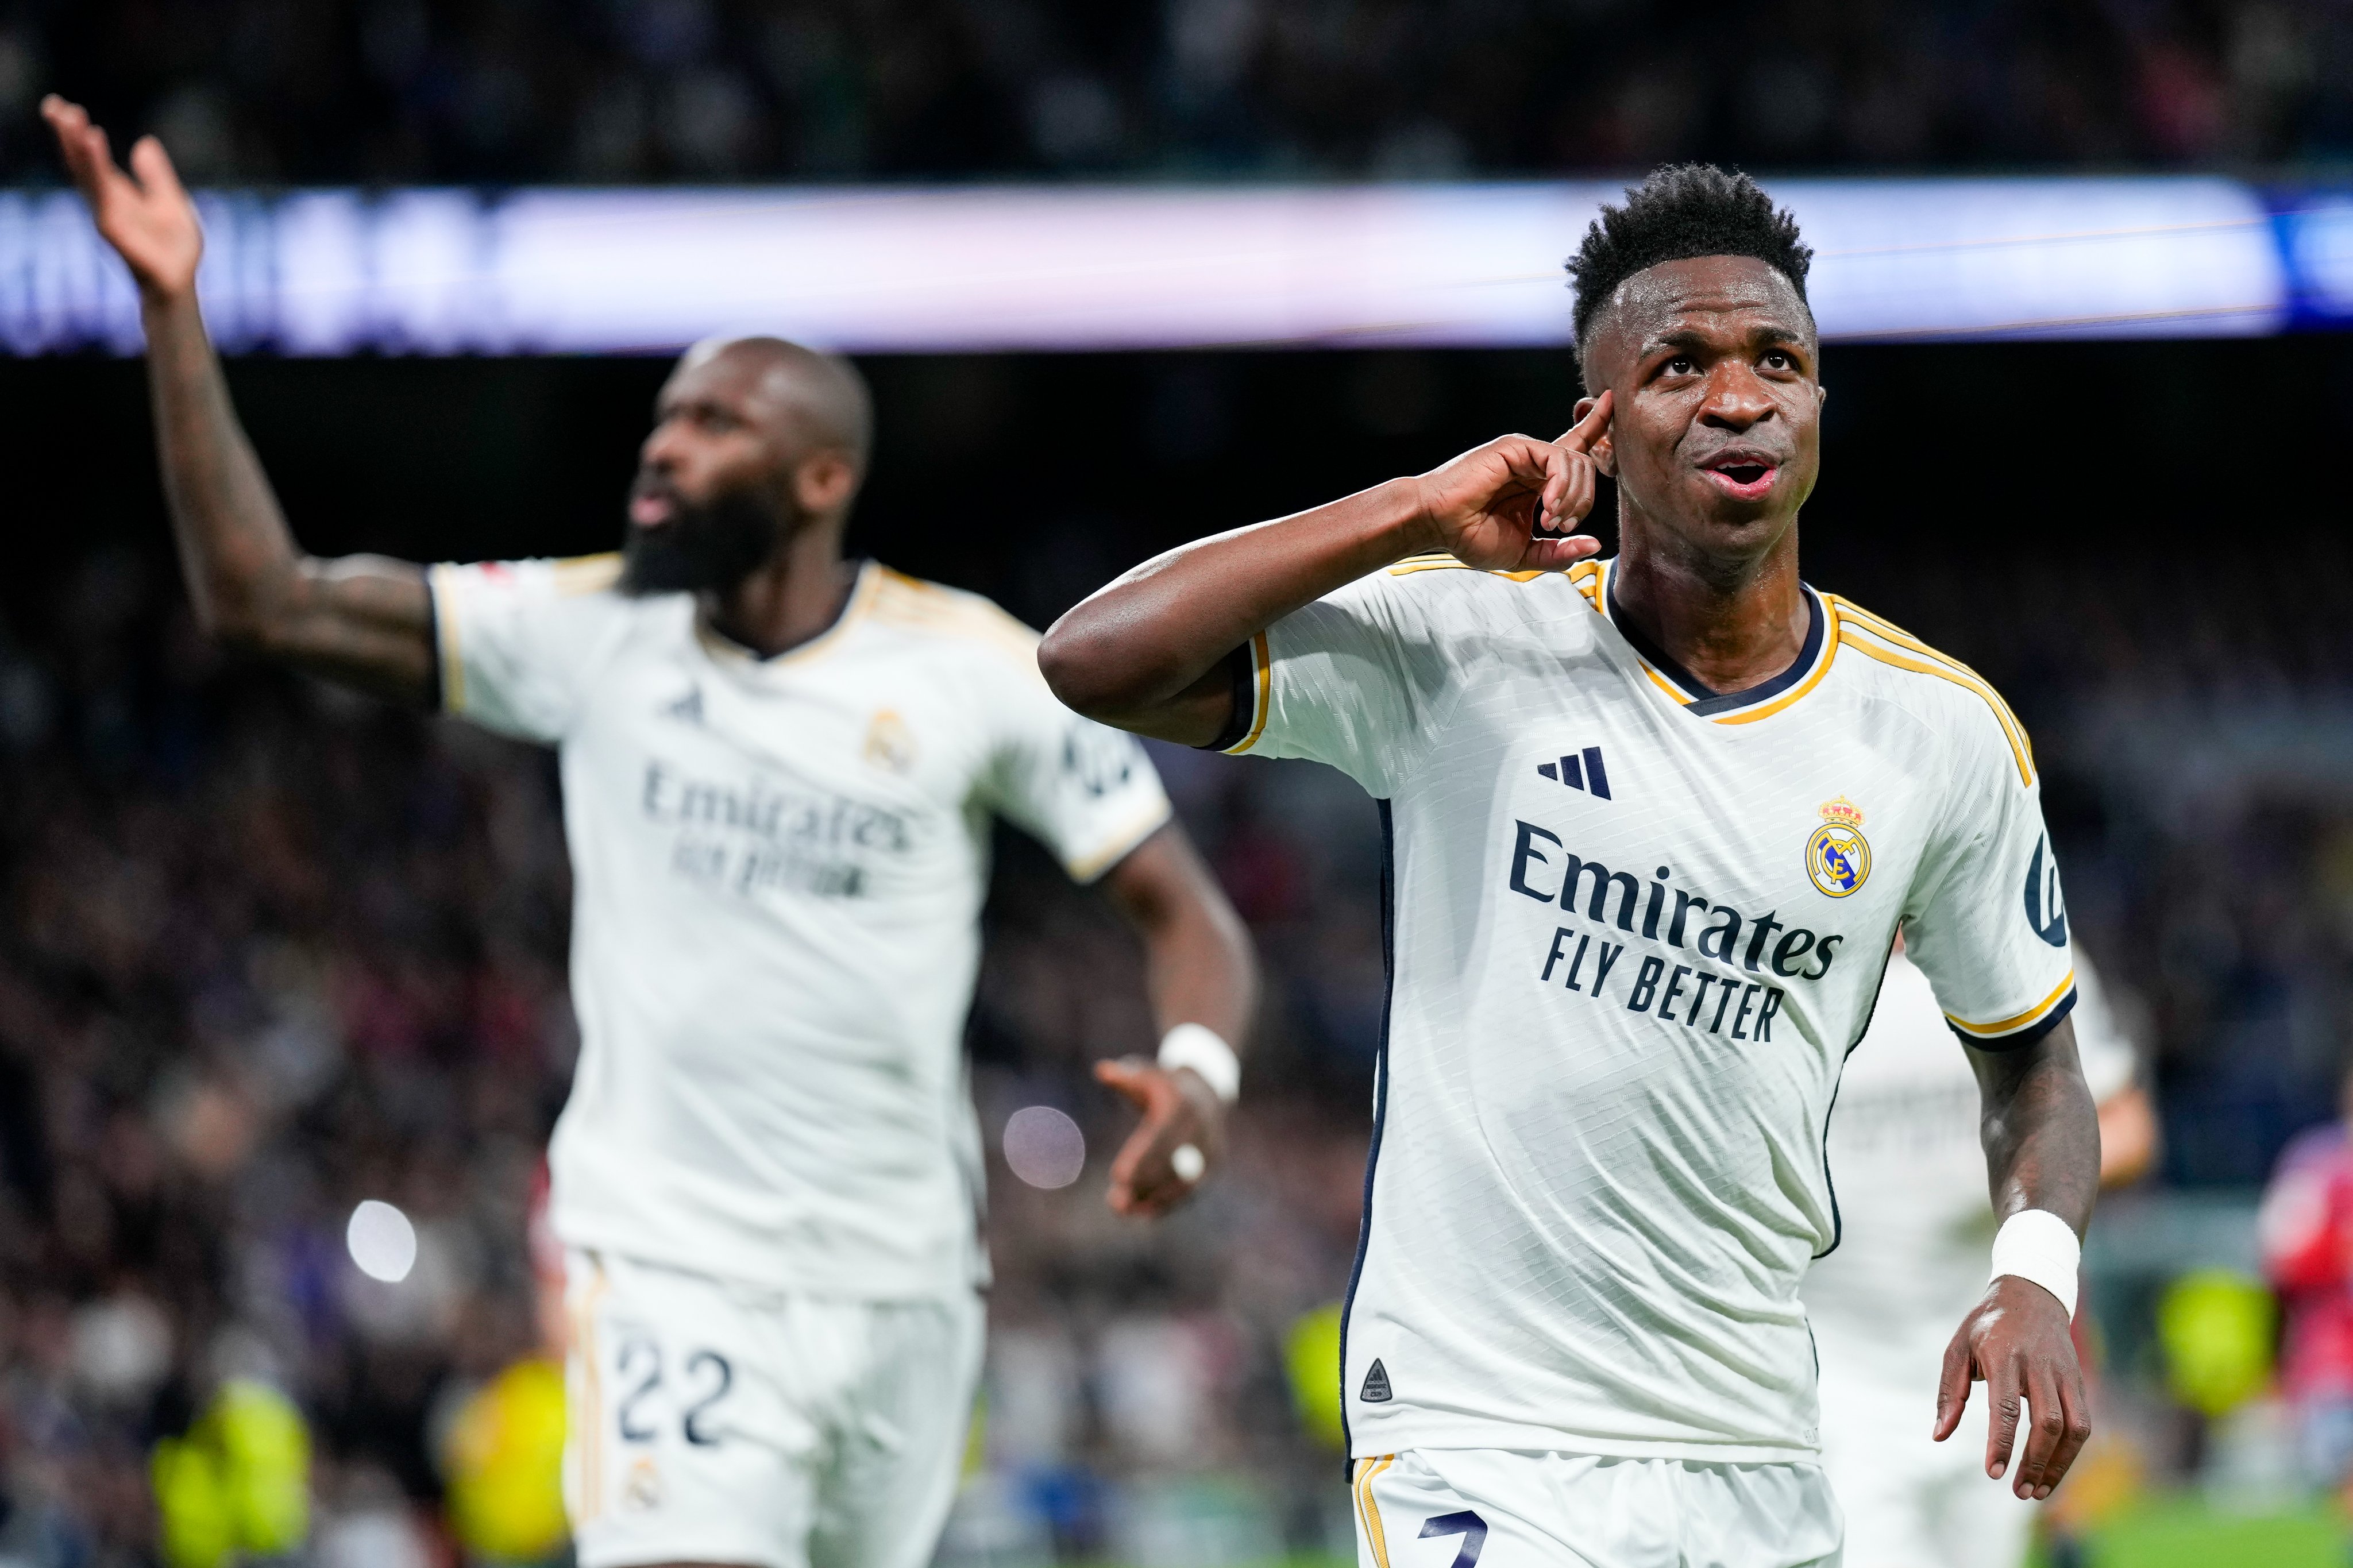 Expert claims that Vinicius Junior-Kylian Mbappe clash is “inevitable” at Real Madrid